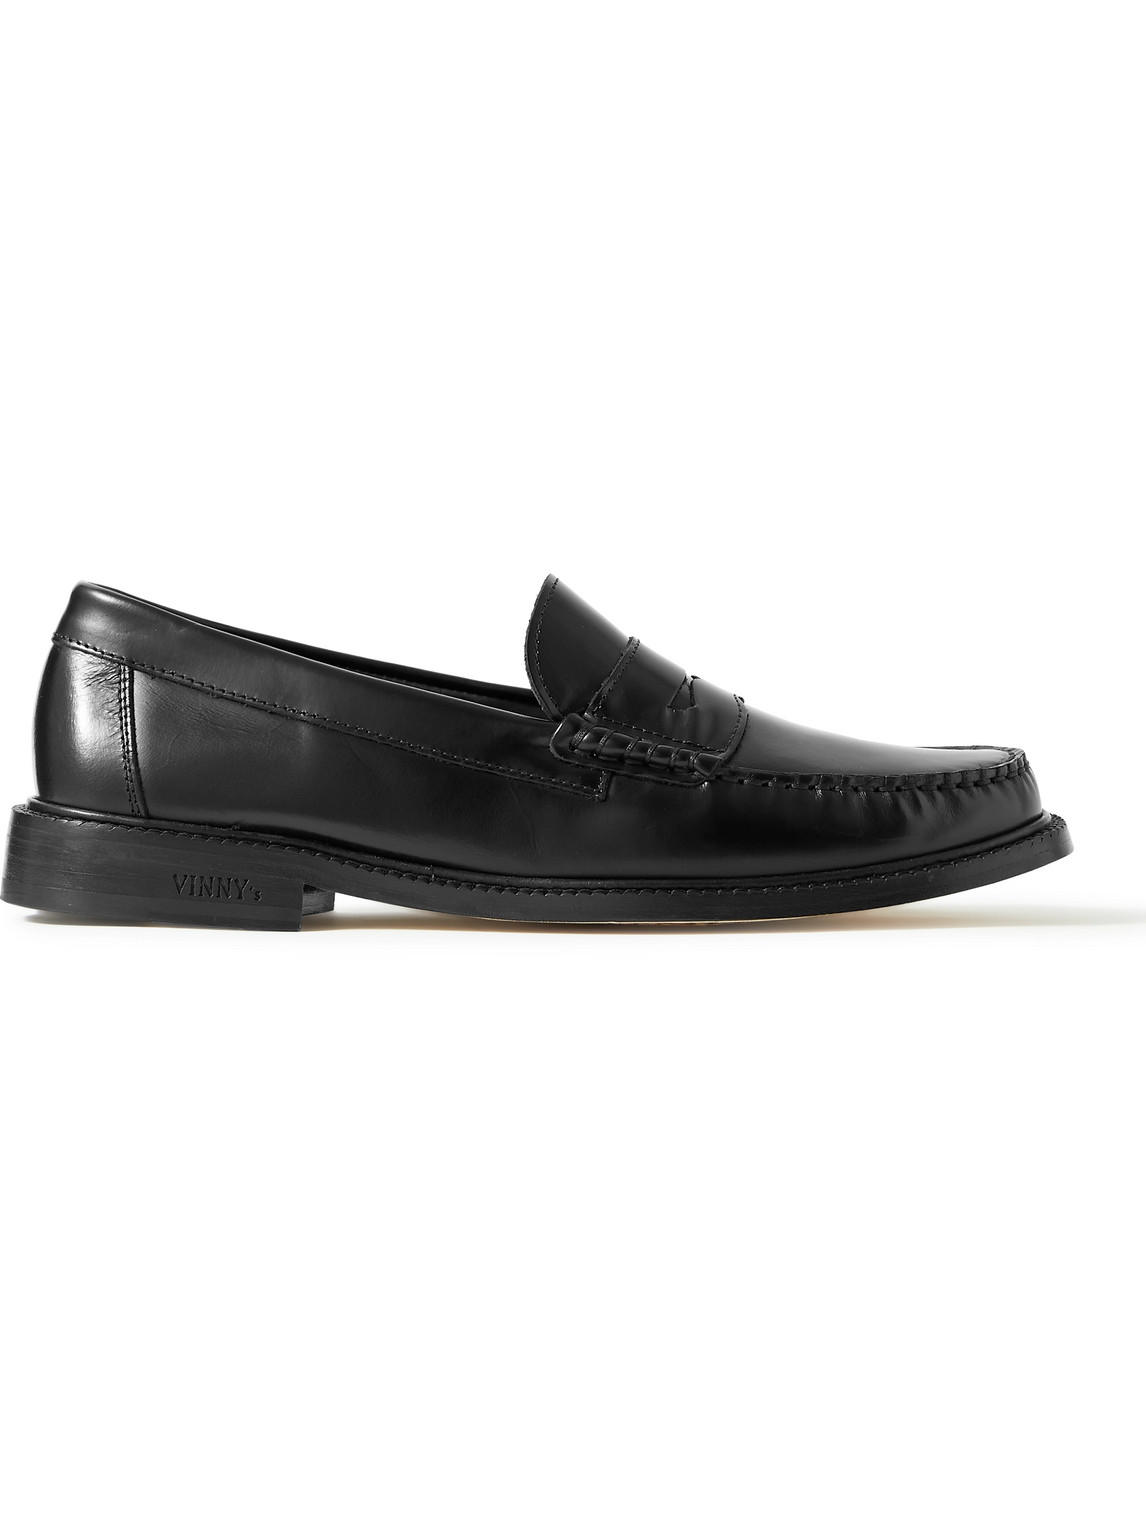 Vinny's Yardee Leather Penny Loafers In Black